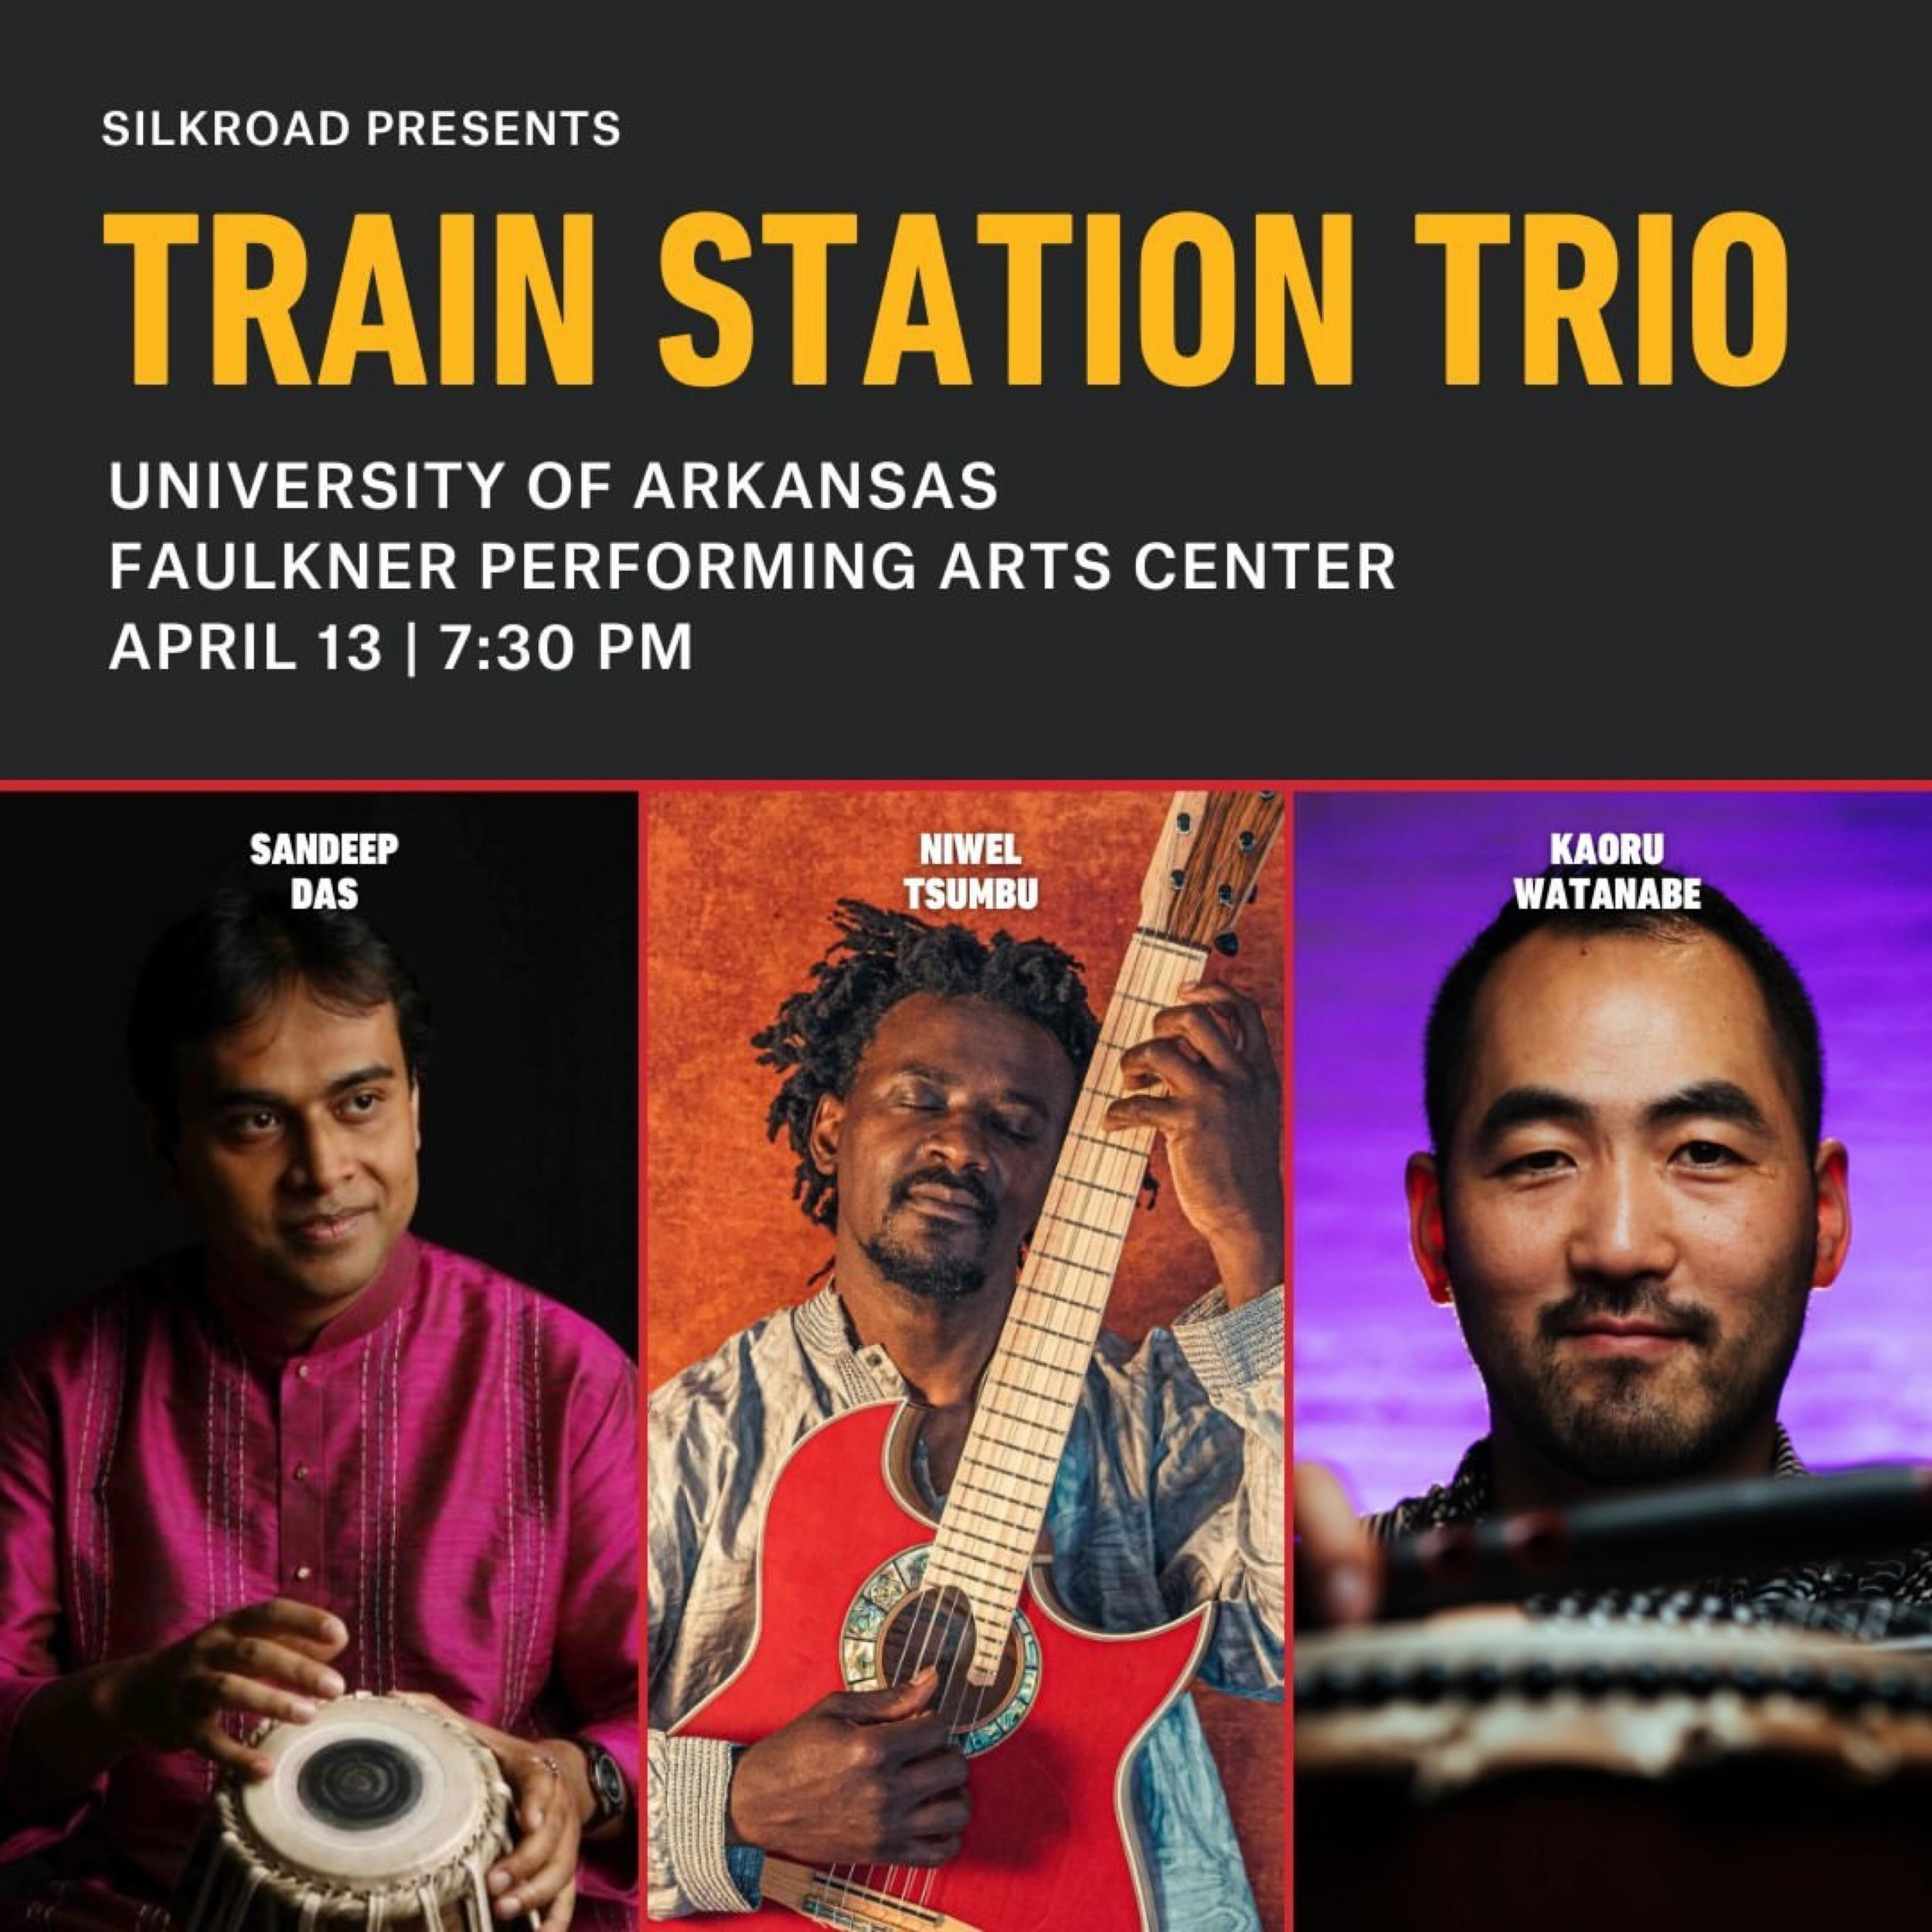 I love these two souls and excited to spend the next few days with them in Arkansas making music and spreading the message!

#Repost @silkroadproject
・・・
All aboard! Mark your calendars for April 13th as the Train Station Trio, featuring our talented